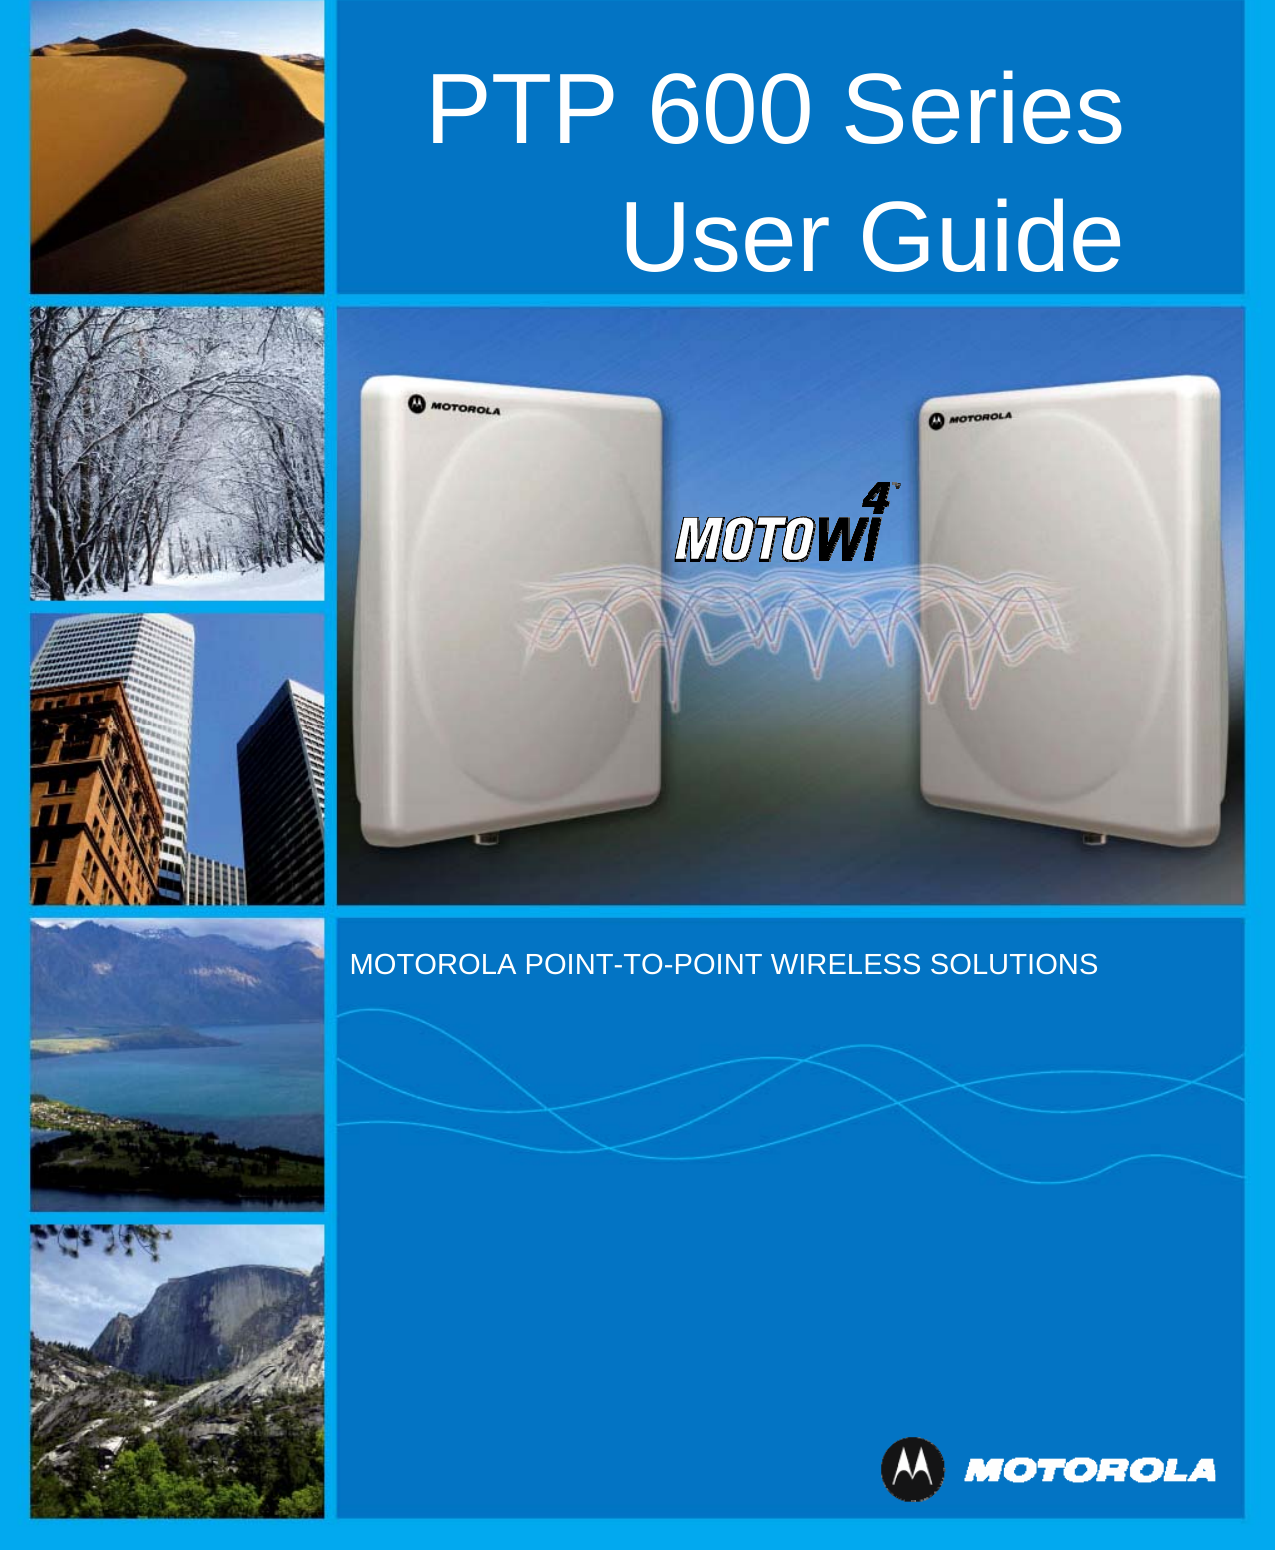 PTP 600 Series User Guide              MOTOROLA POINT-TO-POINT WIRELESS SOLUTIONS 